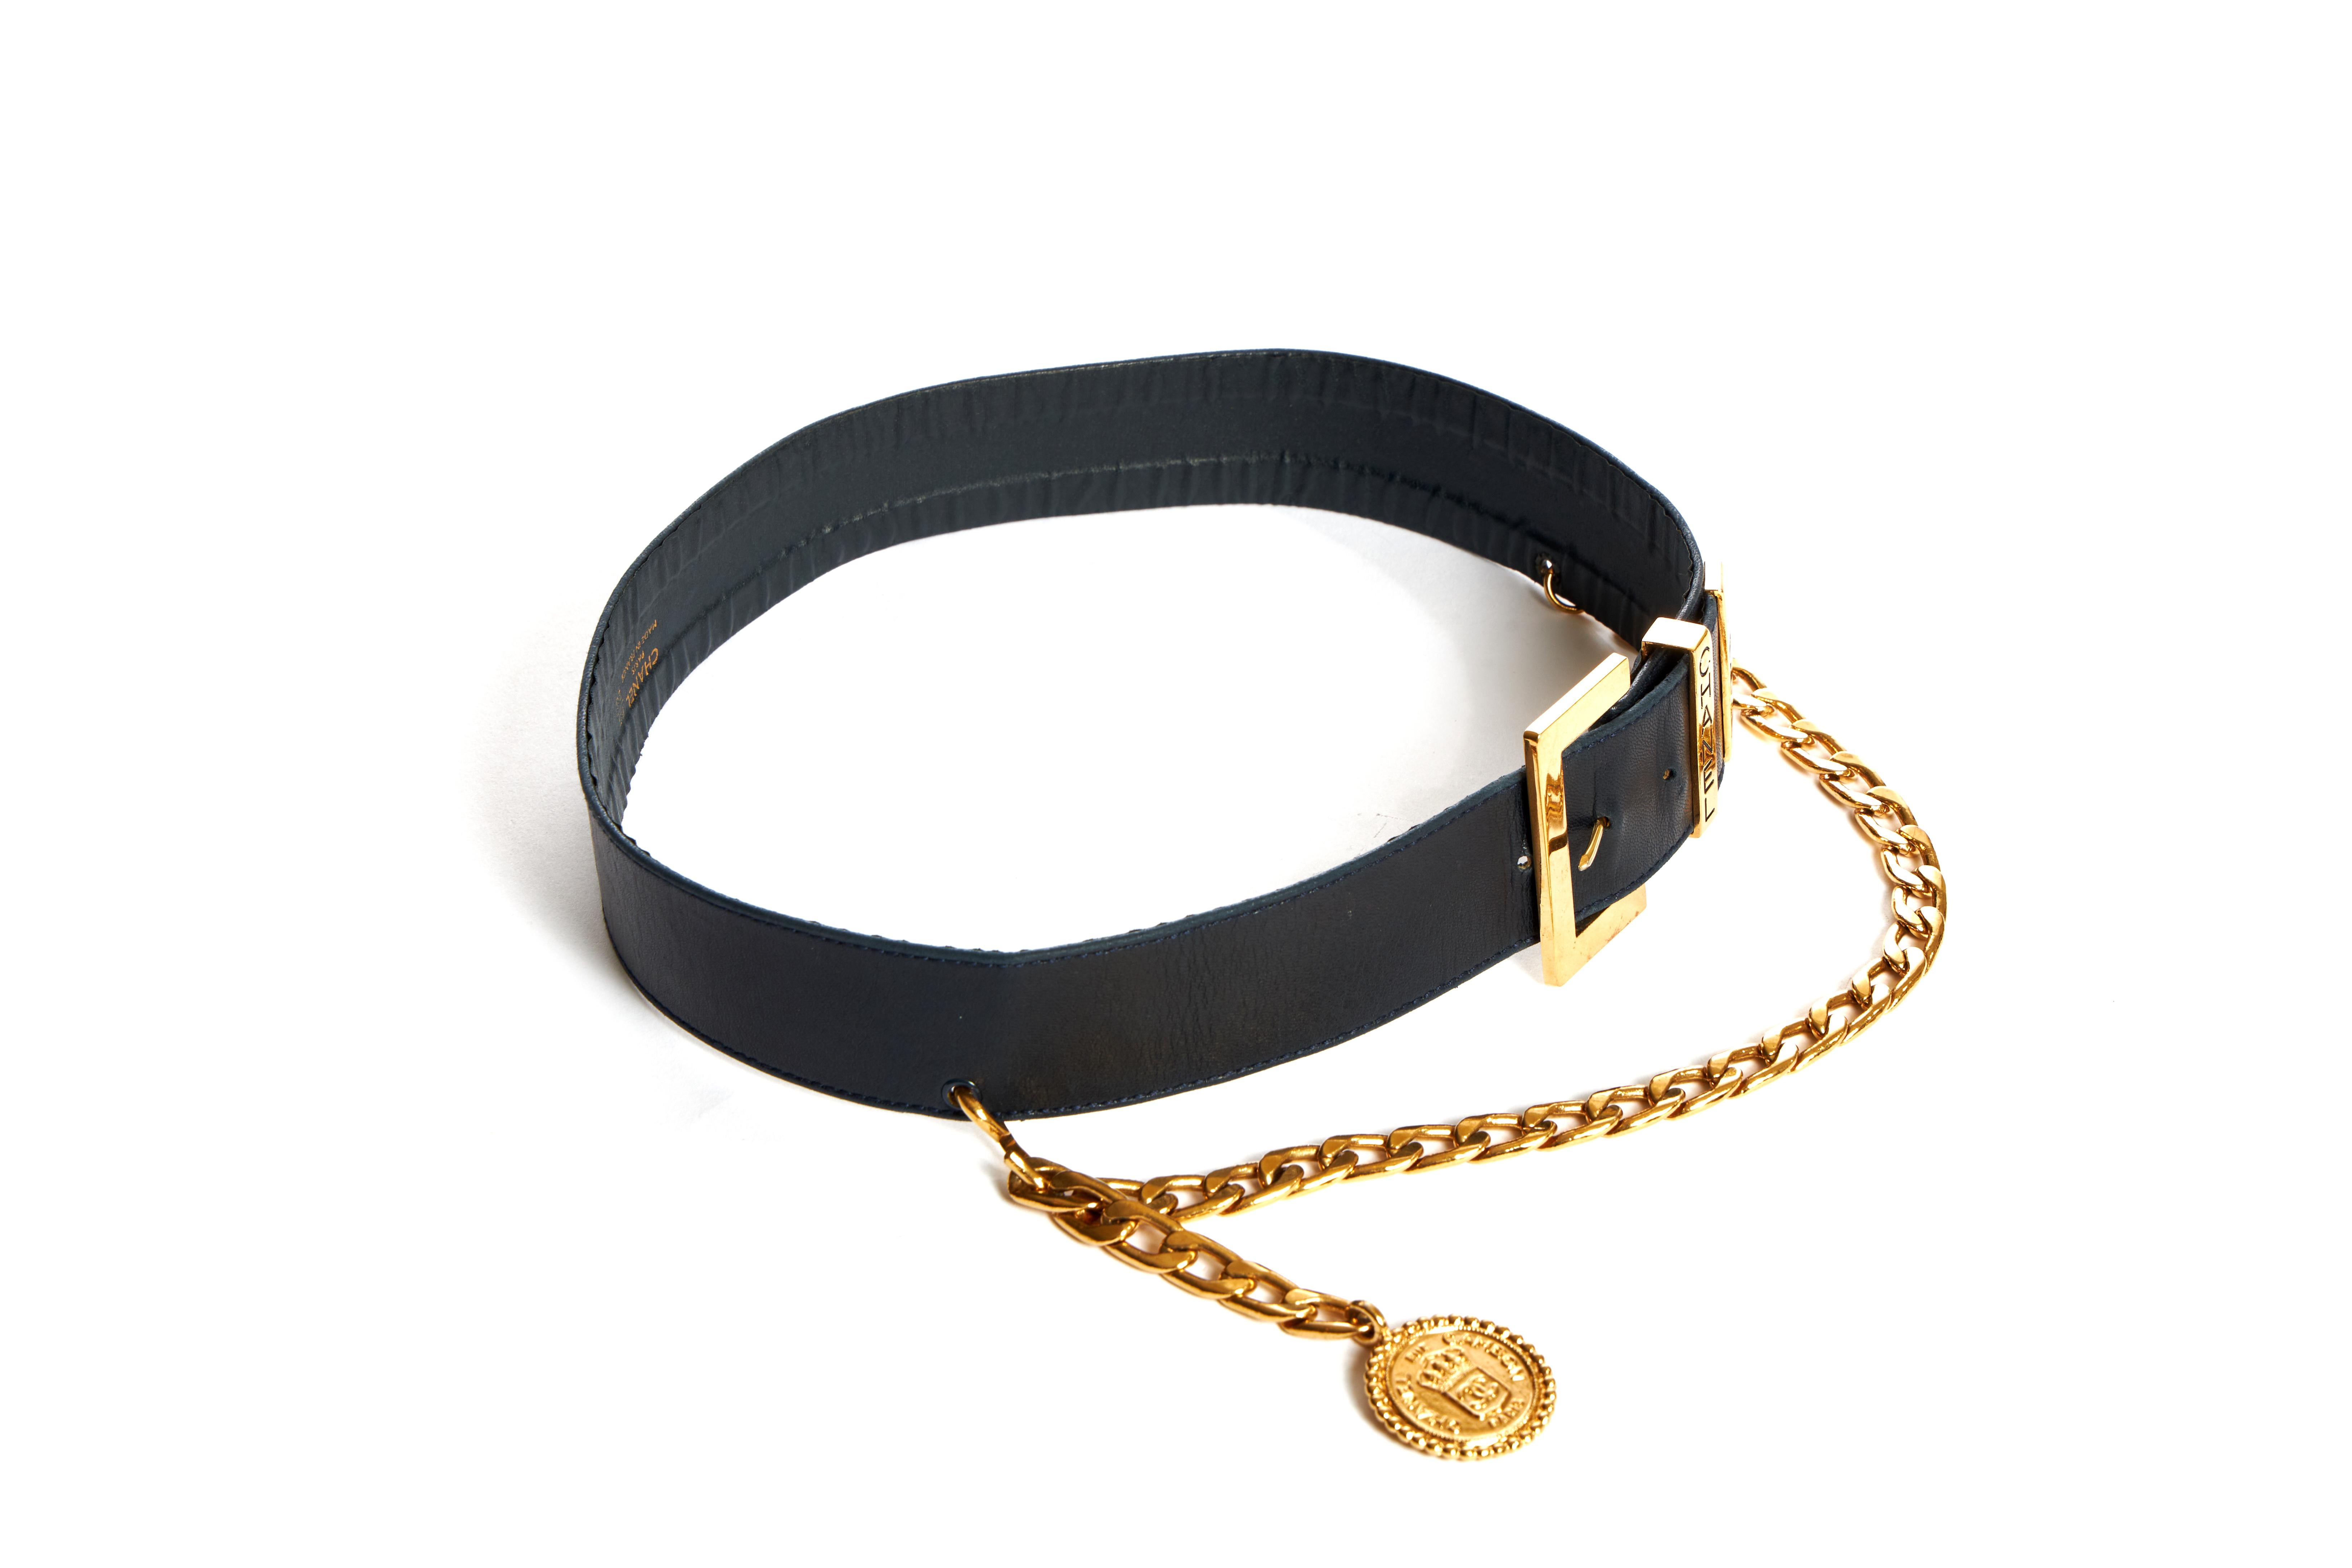 Chanel 80s navy blue leather belt with gold tone details and chain. Size 26. Chain: Length 15